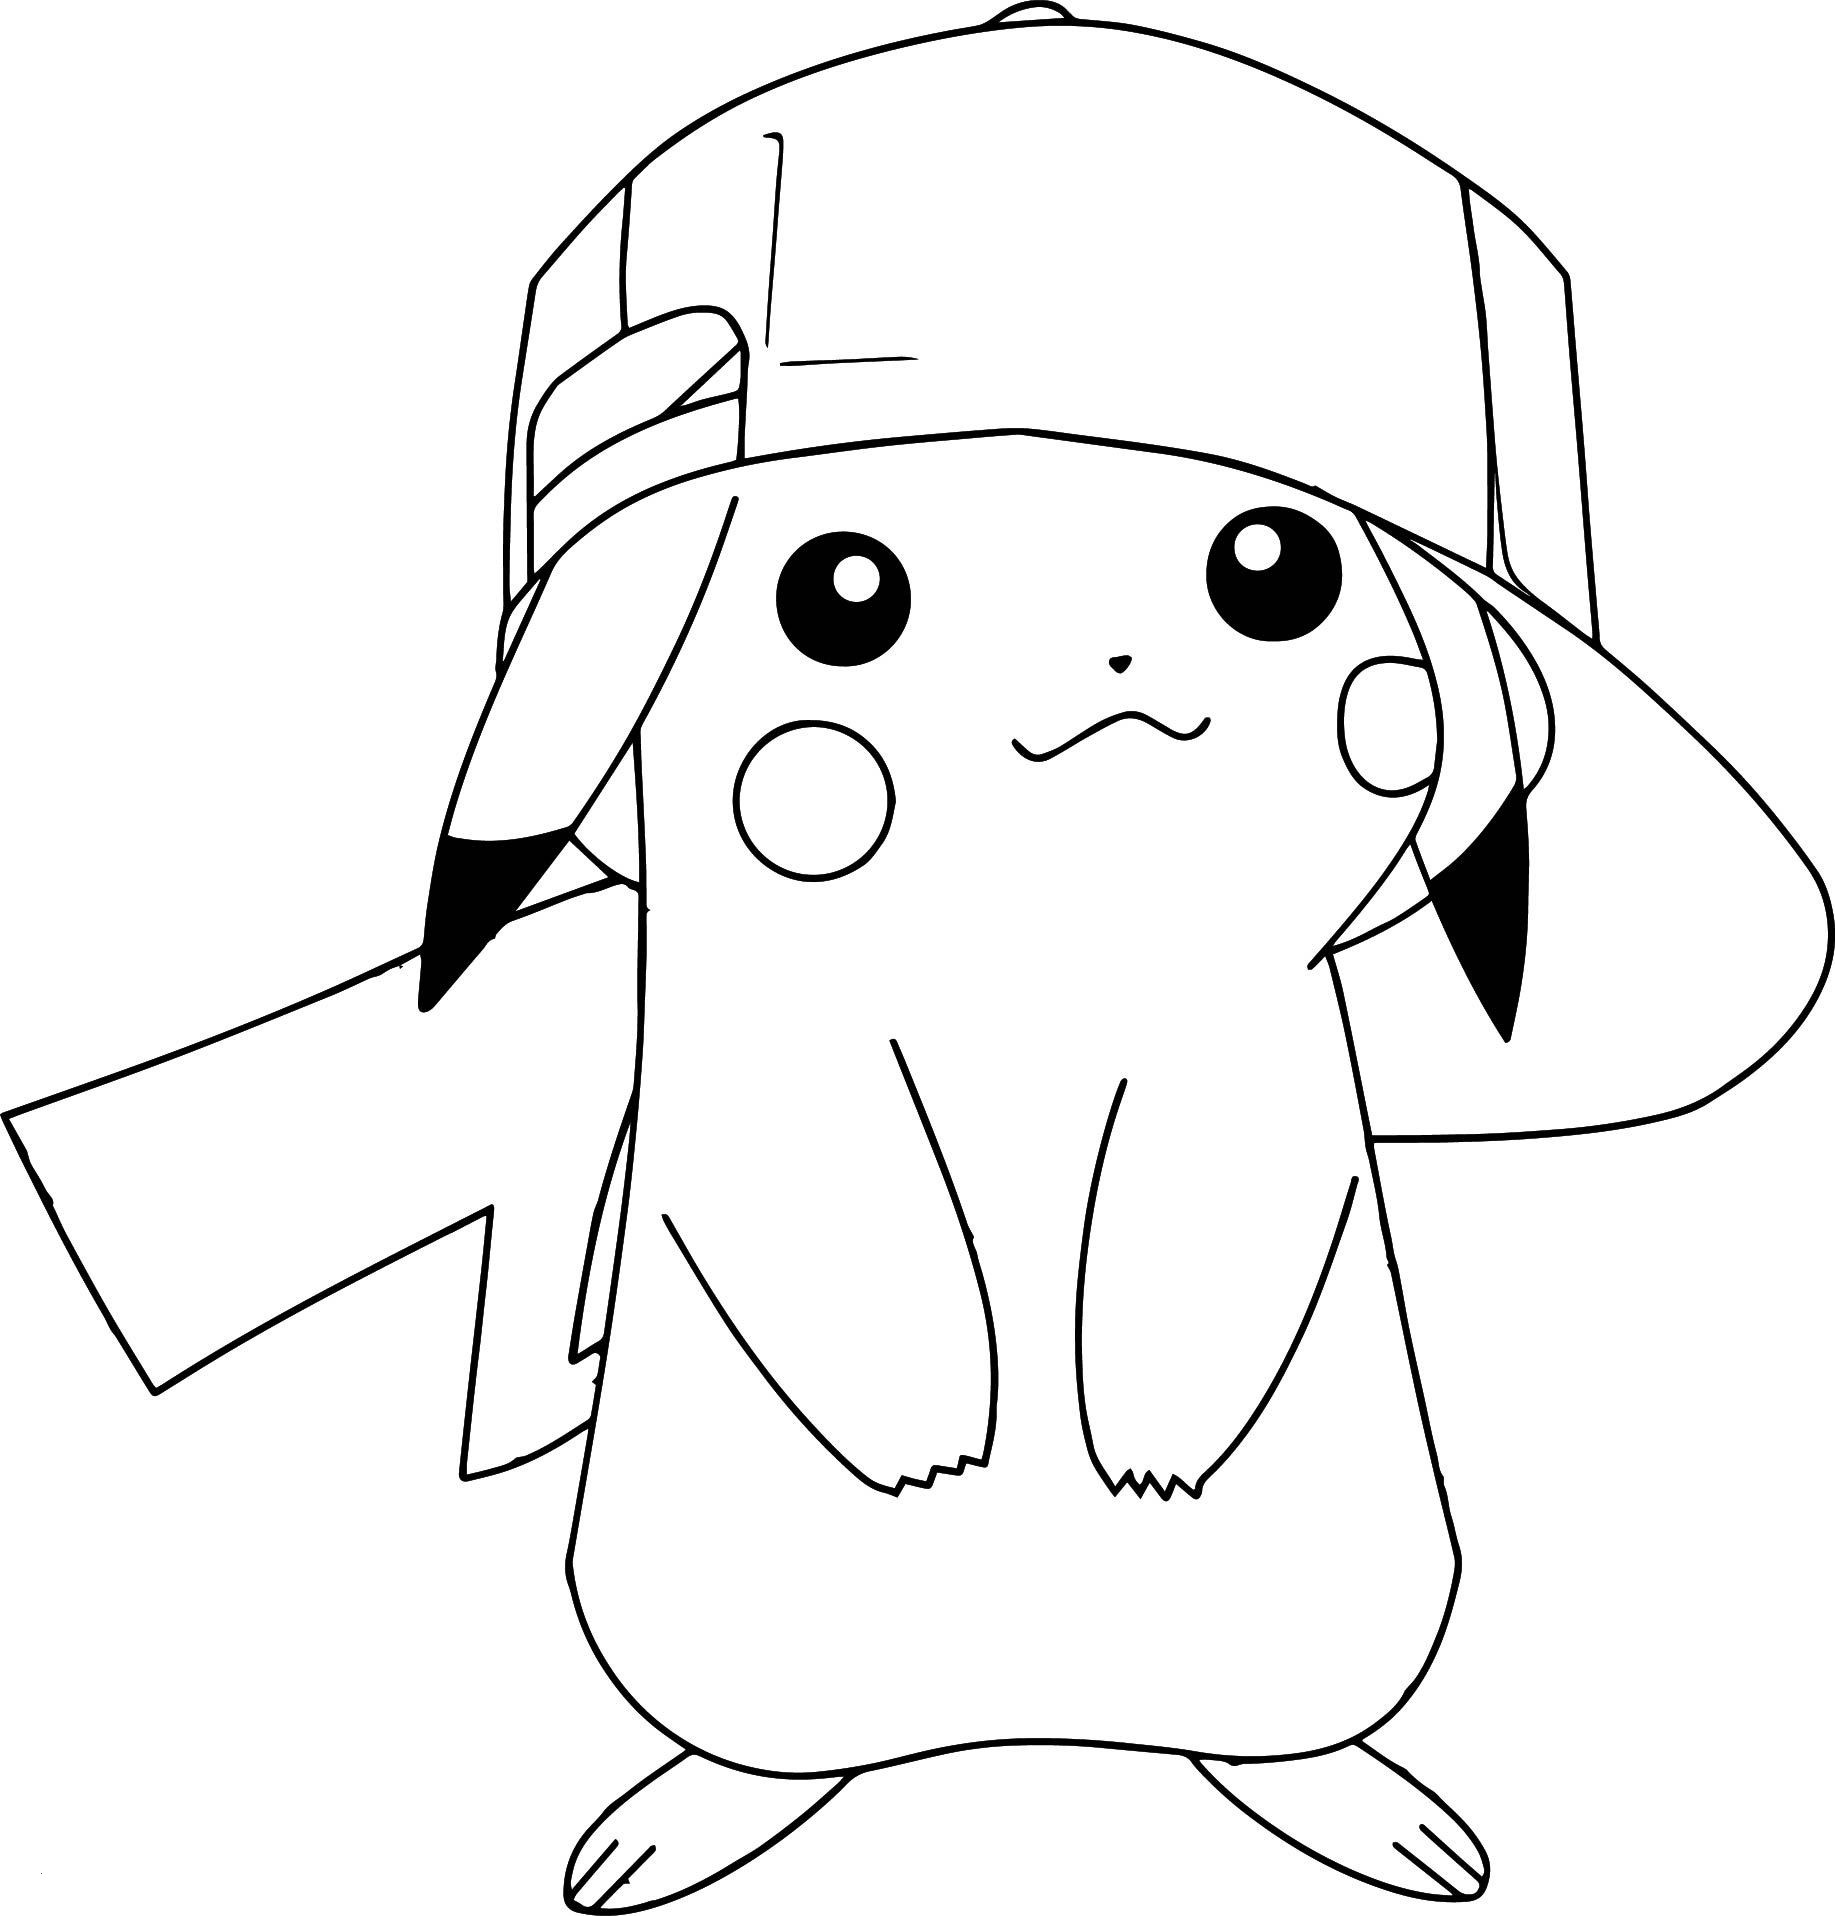 Pokemon Coloring Pages Pikachu and ash